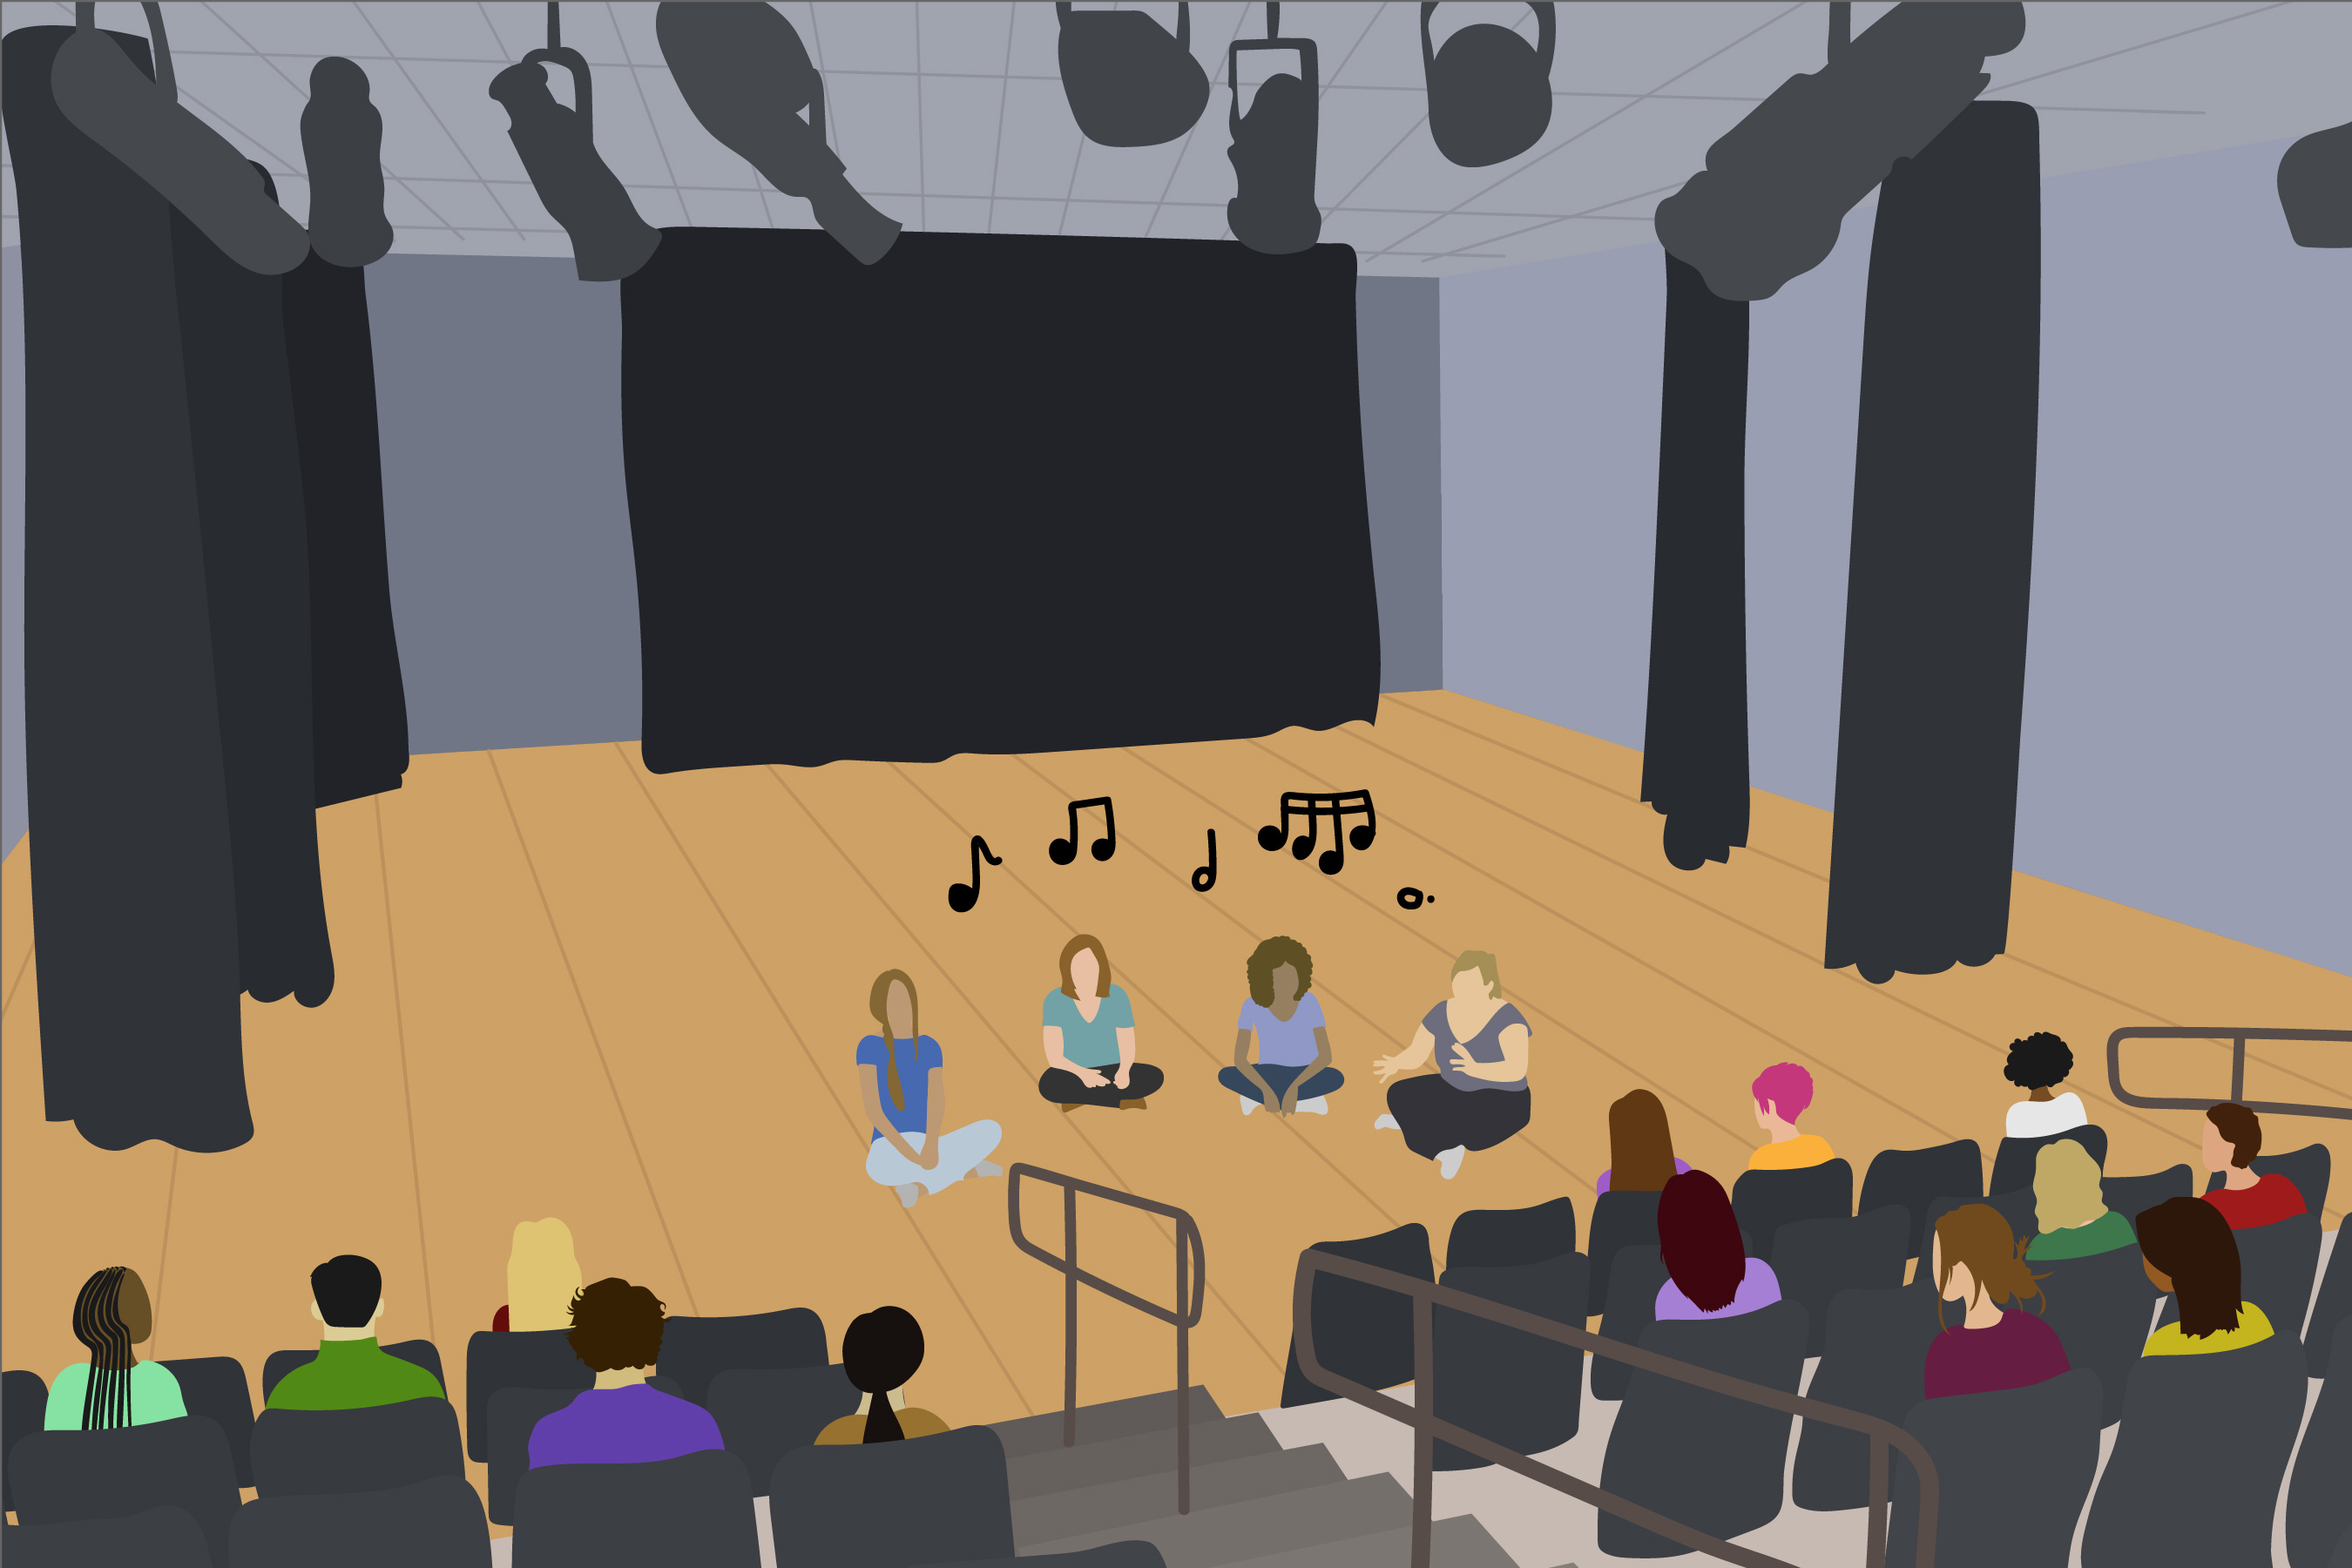 Image is an illustration of several students sitting cross-legged in a theater, music notes rising up around them. The theater has many people in it, depicting from behind.